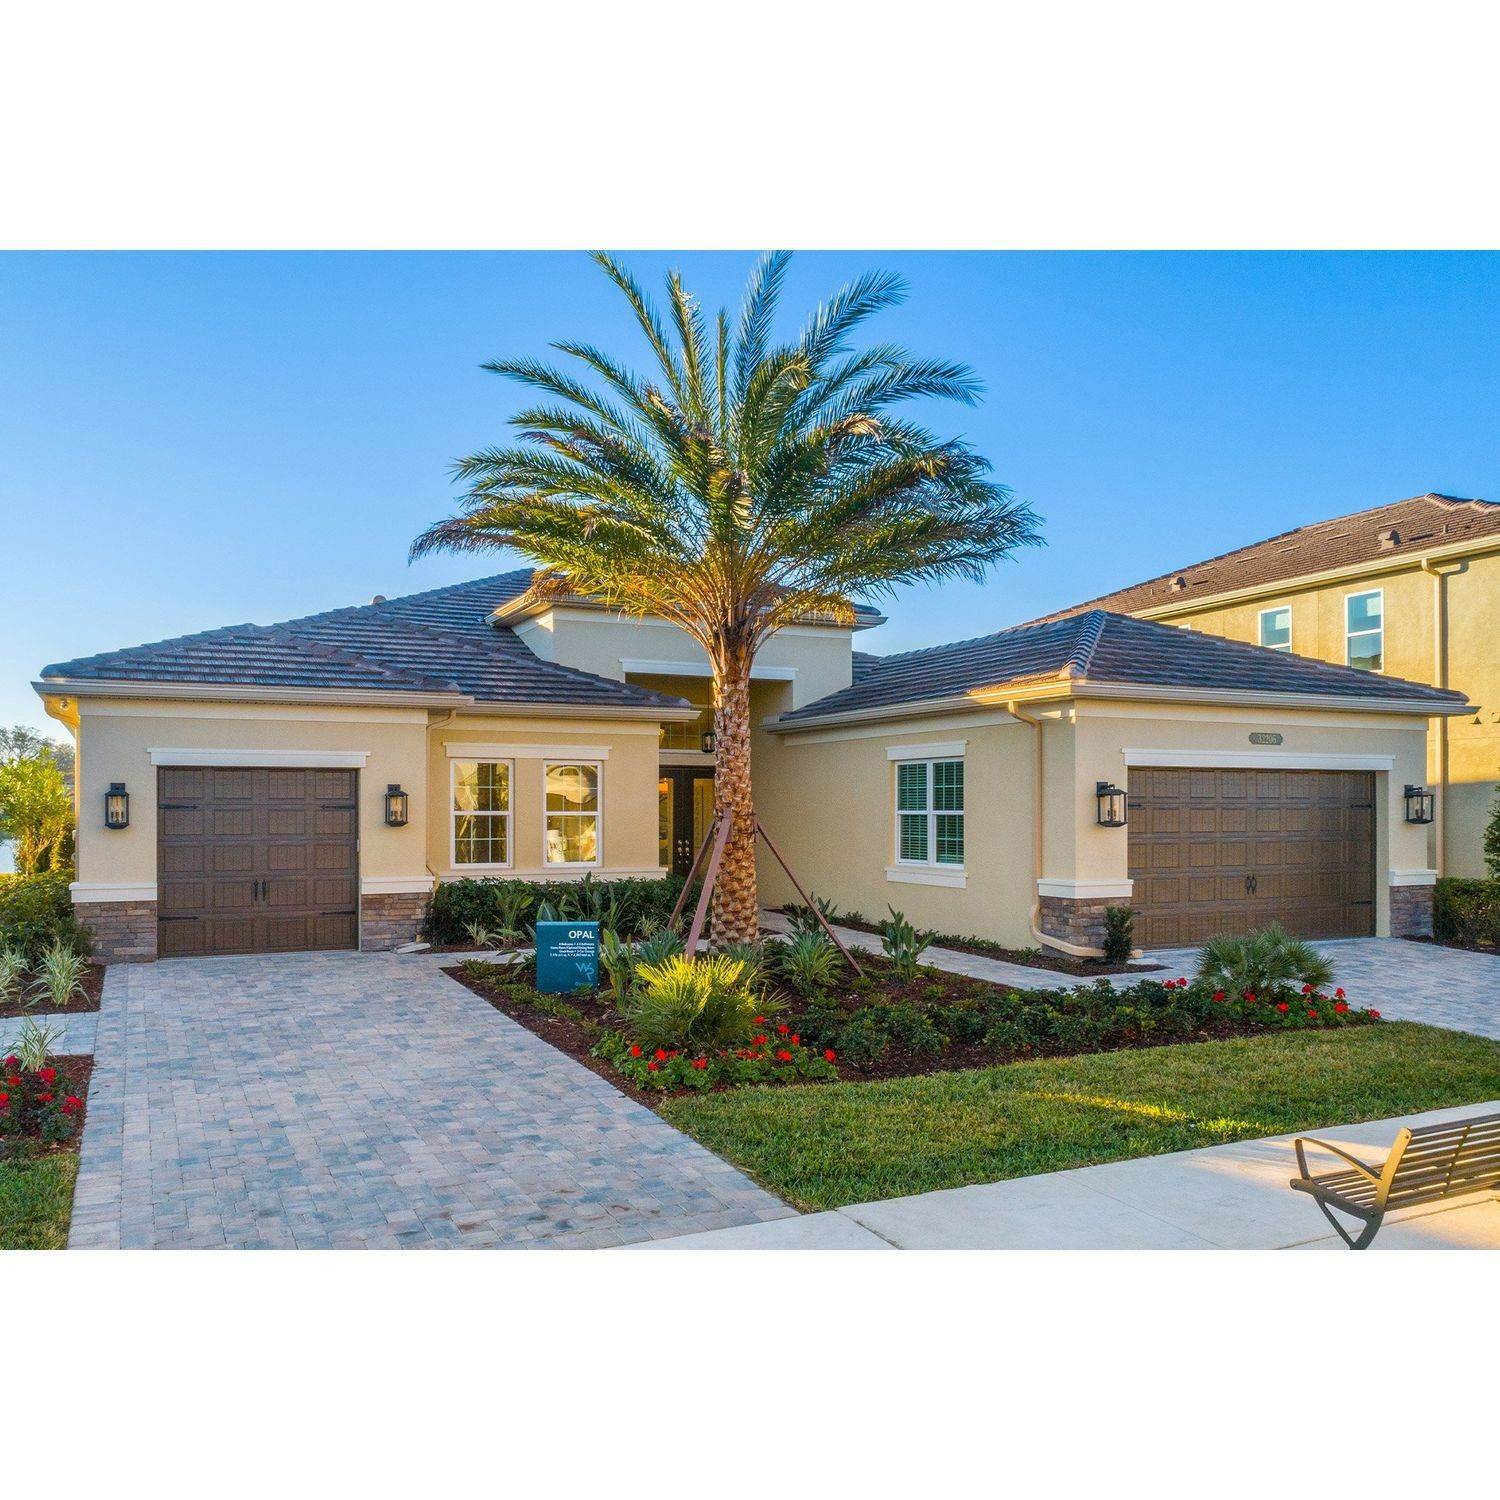 Single Family for Sale at Winding Ridge - Opal 30451 Sunland Court WESLEY CHAPEL, FLORIDA 33543 UNITED STATES